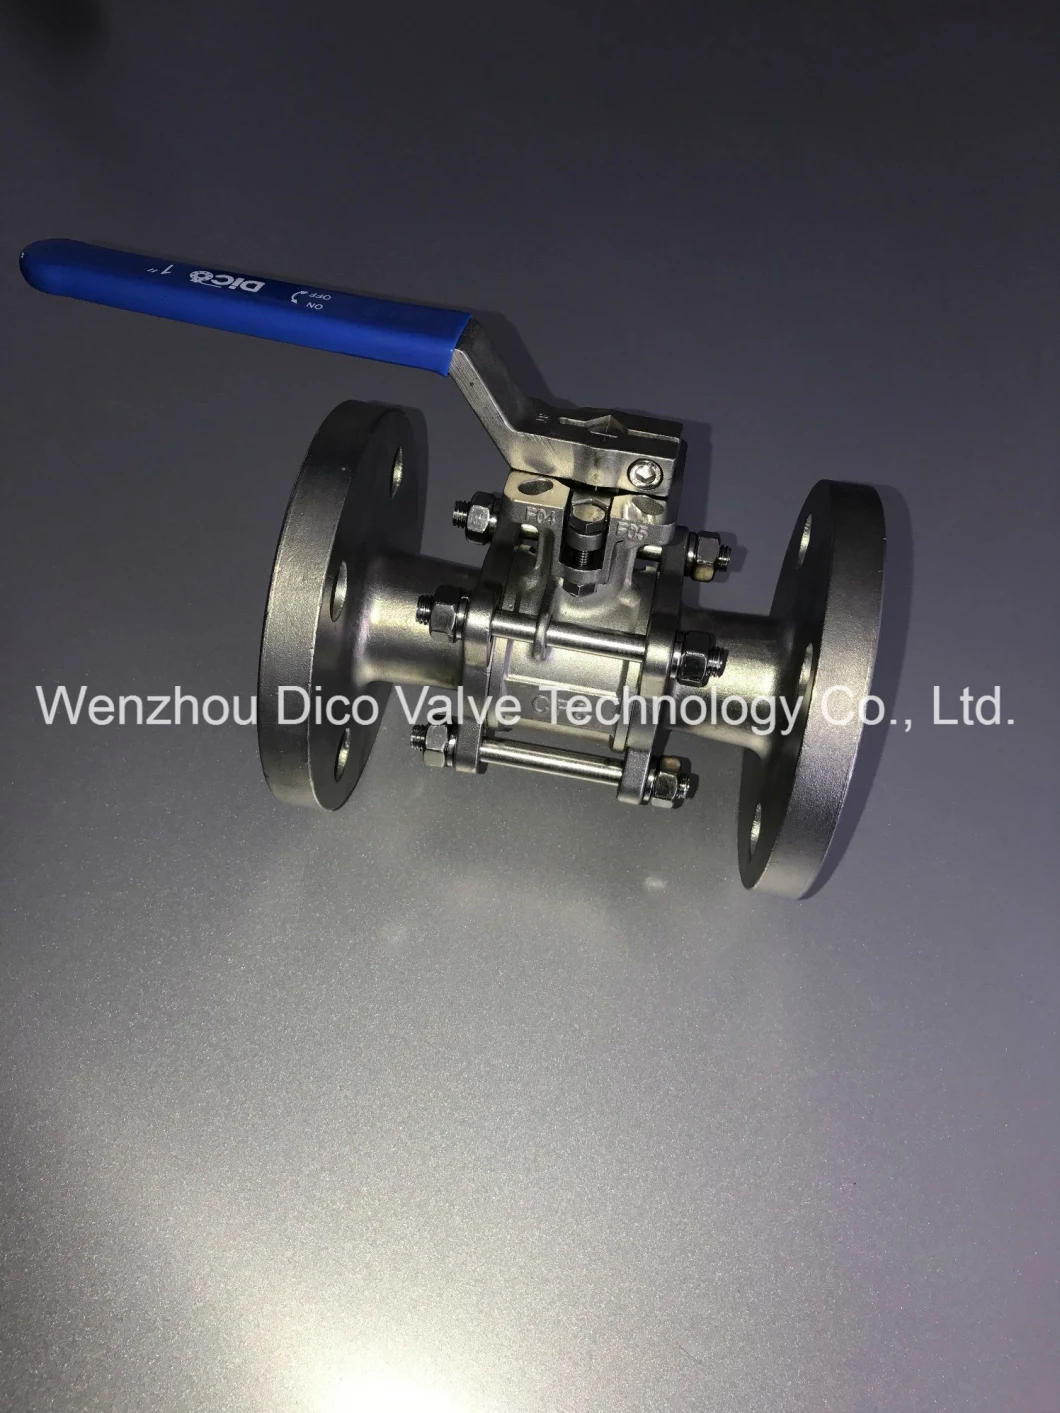 Dico Brand 3PC Floating API Stainless Steel Flange Ball Valve with Handle